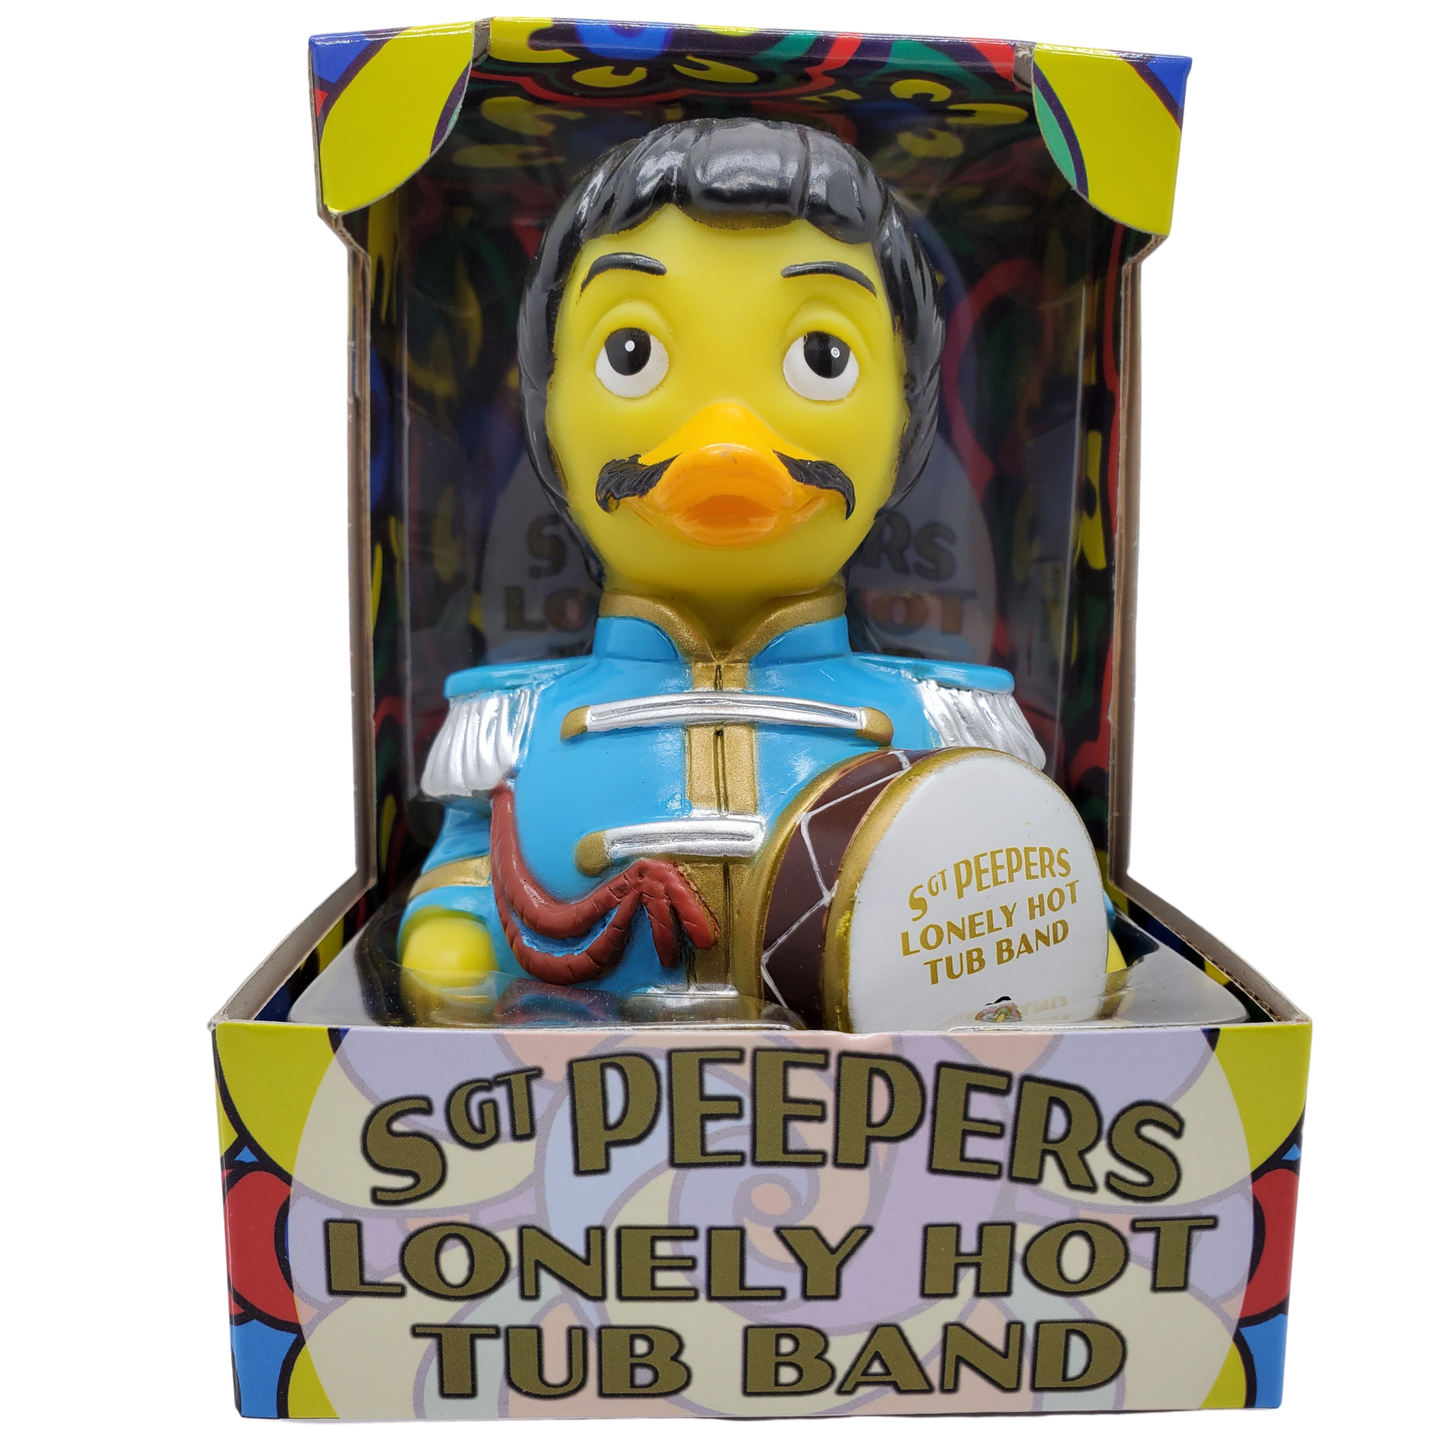 Sargent Peepers Lonely Hot Tub Band Beetles Rubber Duck - Hidden Gems Novelty